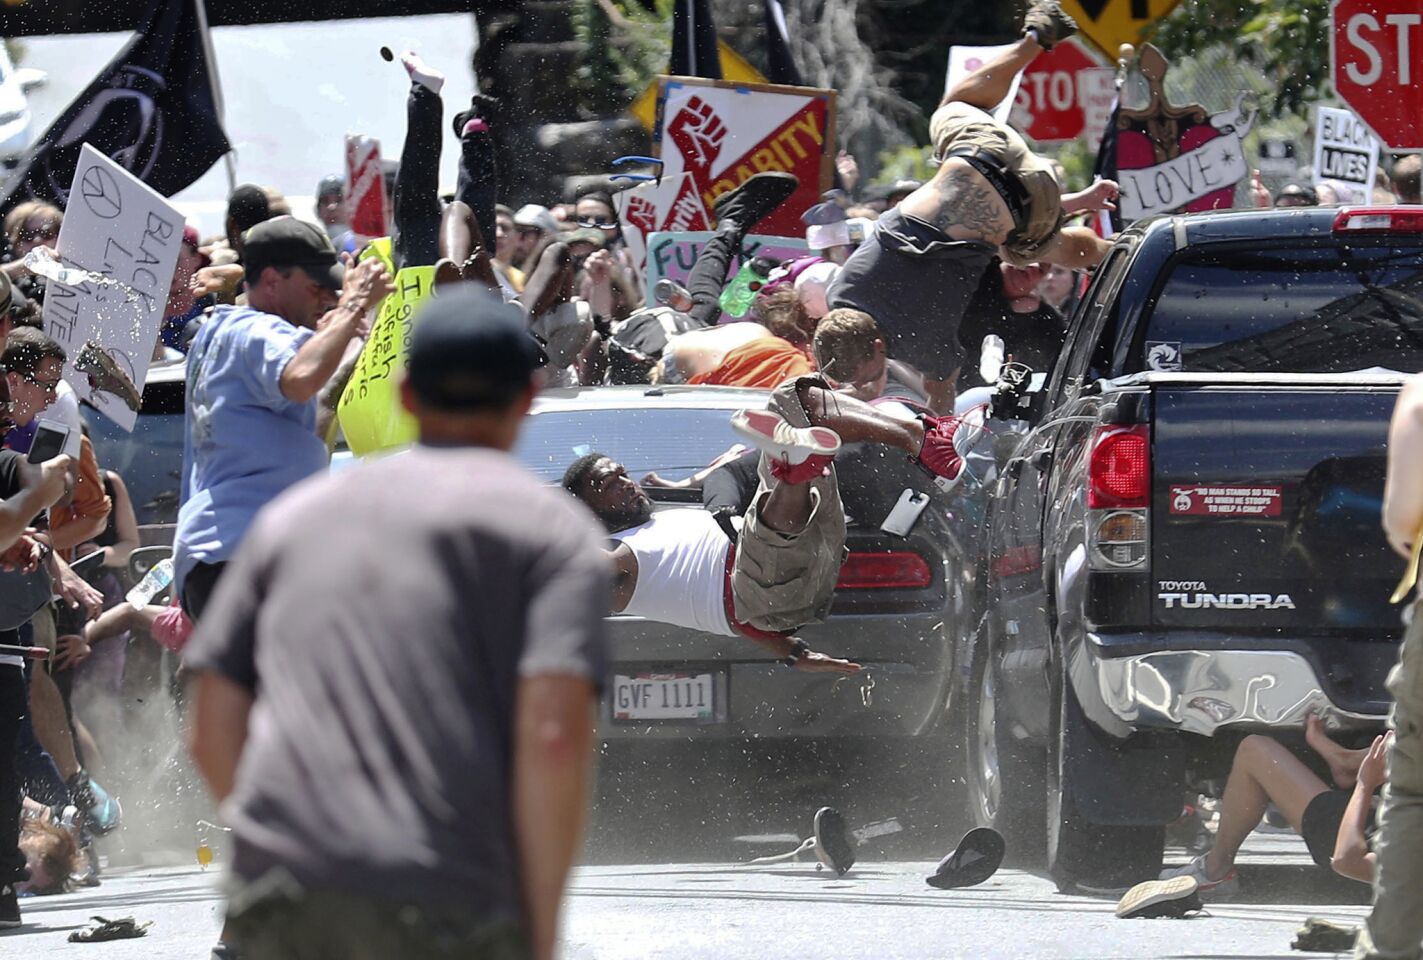 People fly into the air as a vehicle drives into a group of protesters demonstrating against a white nationalist rally in Charlottesville, Va. The nationalists were holding the rally to protest plans by the city of Charlottesville to remove a statue of Confederate Gen. Robert E. Lee.